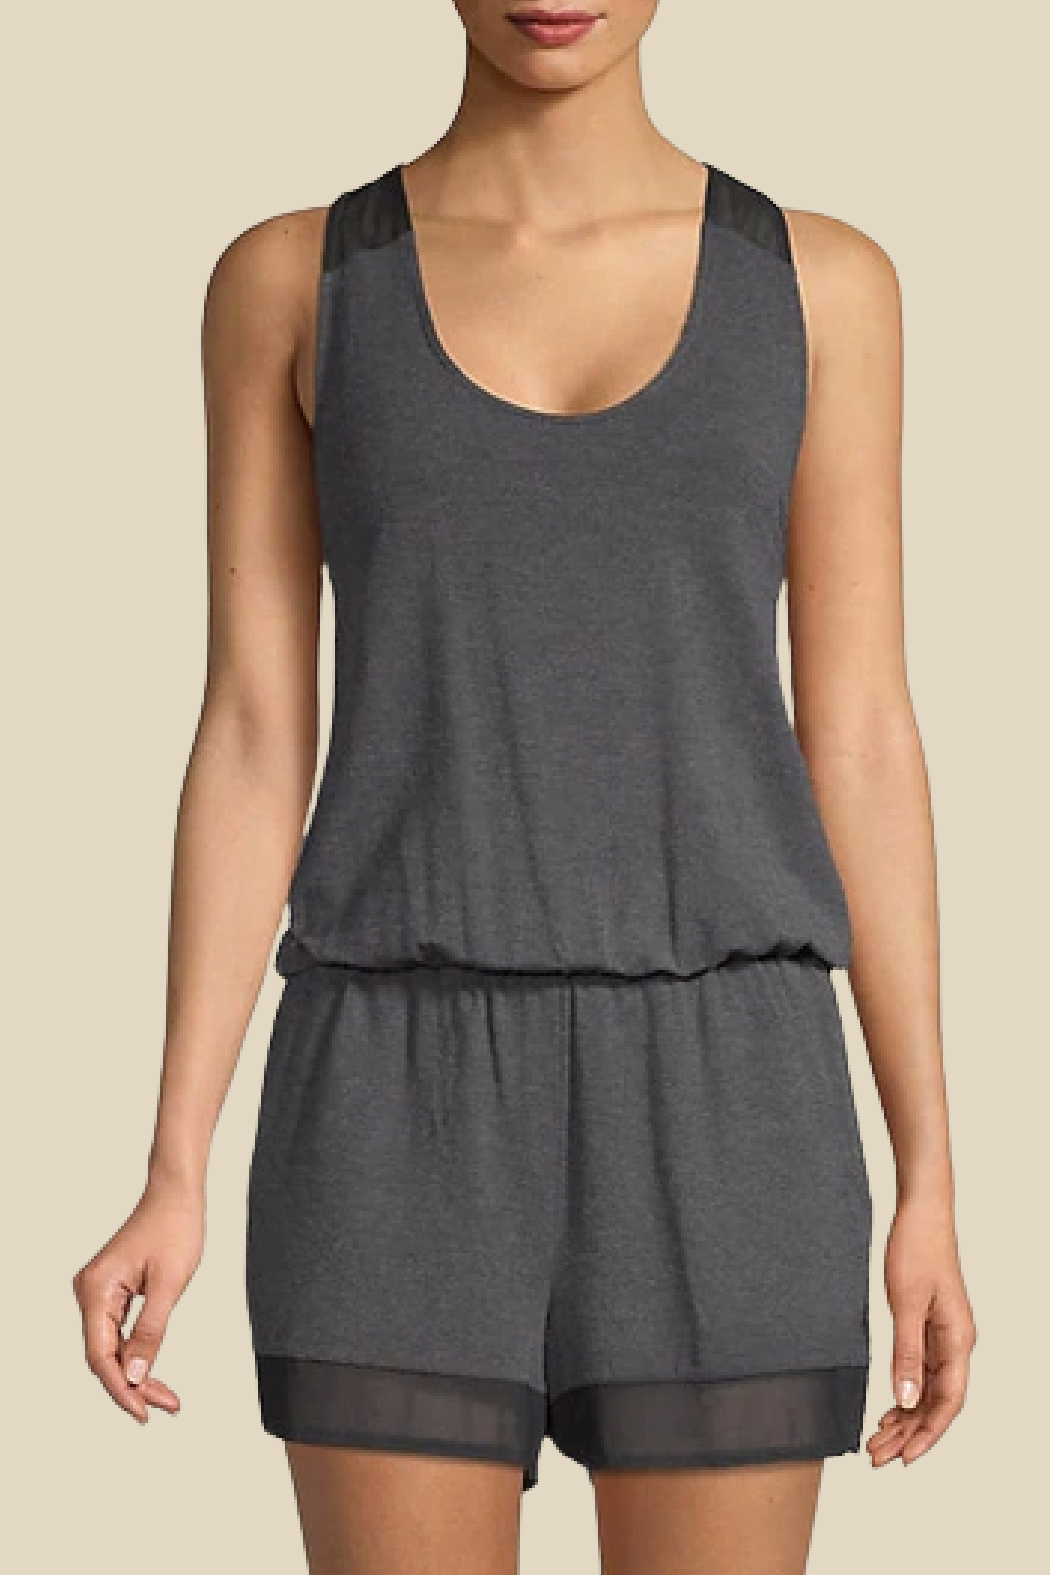 Tranquility Romper